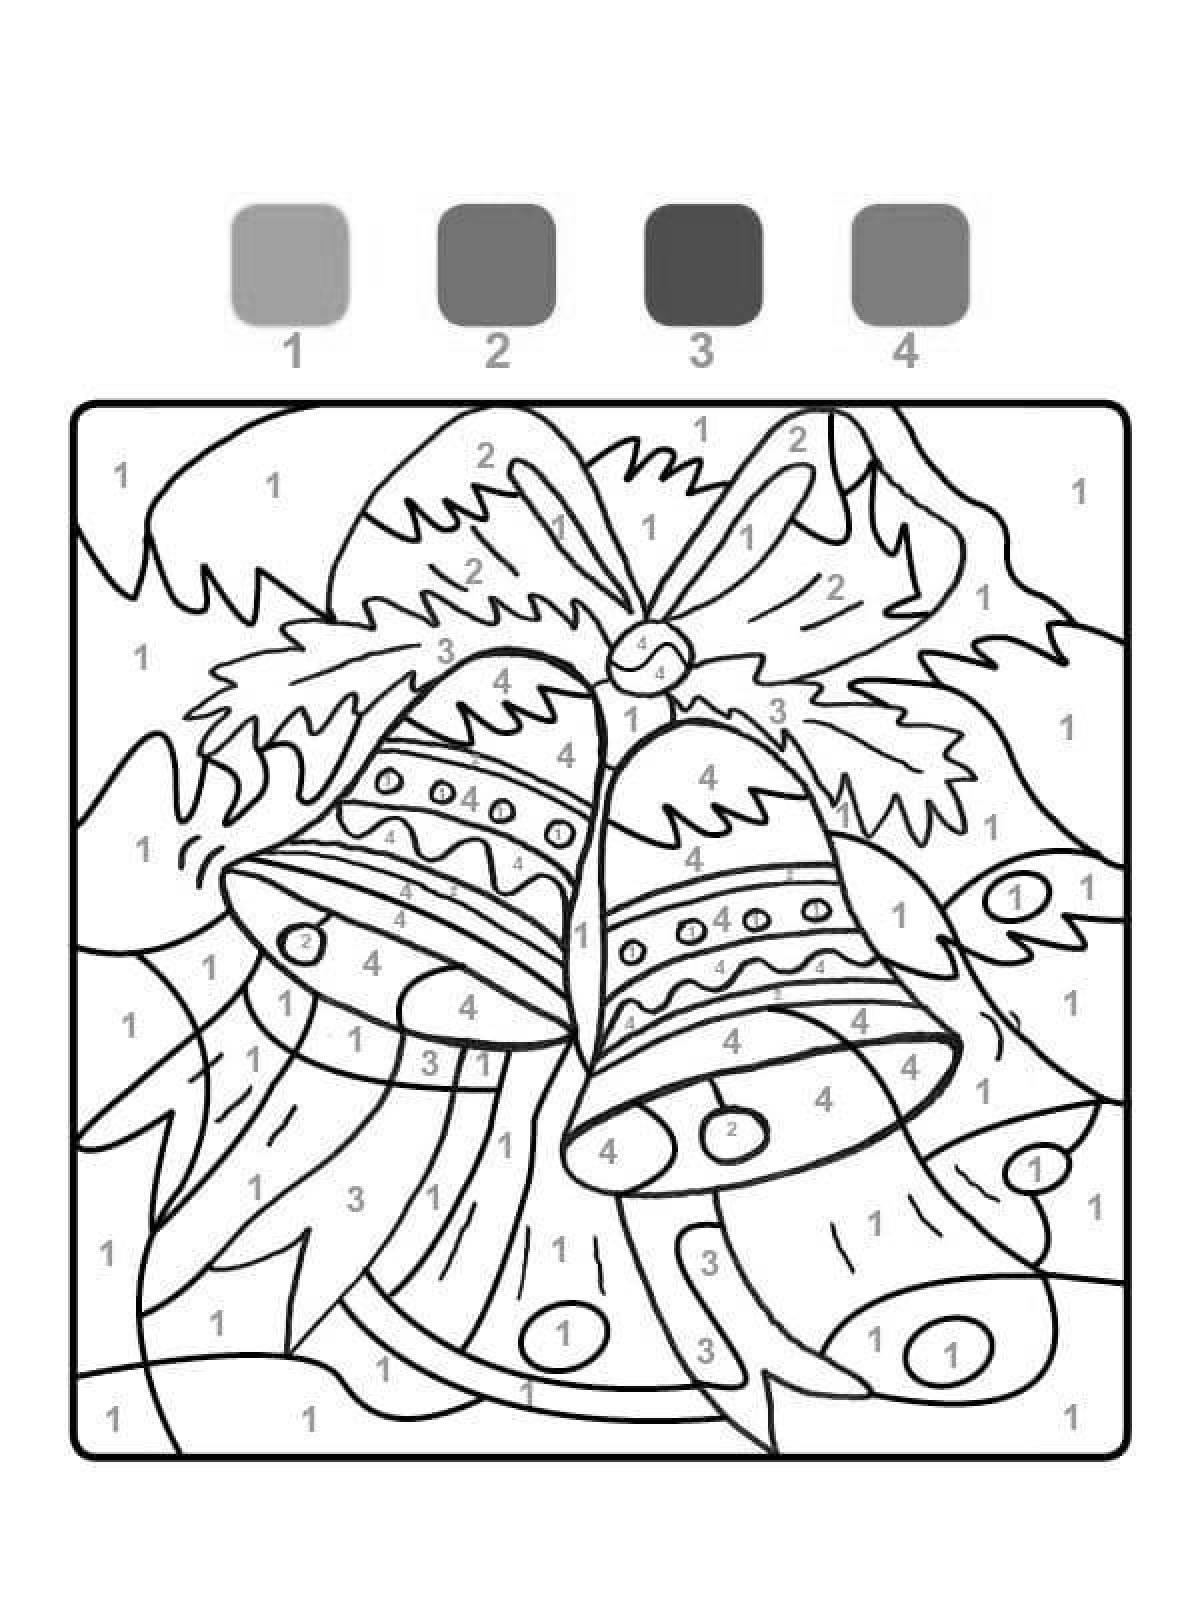 Exciting new year in numbers coloring book